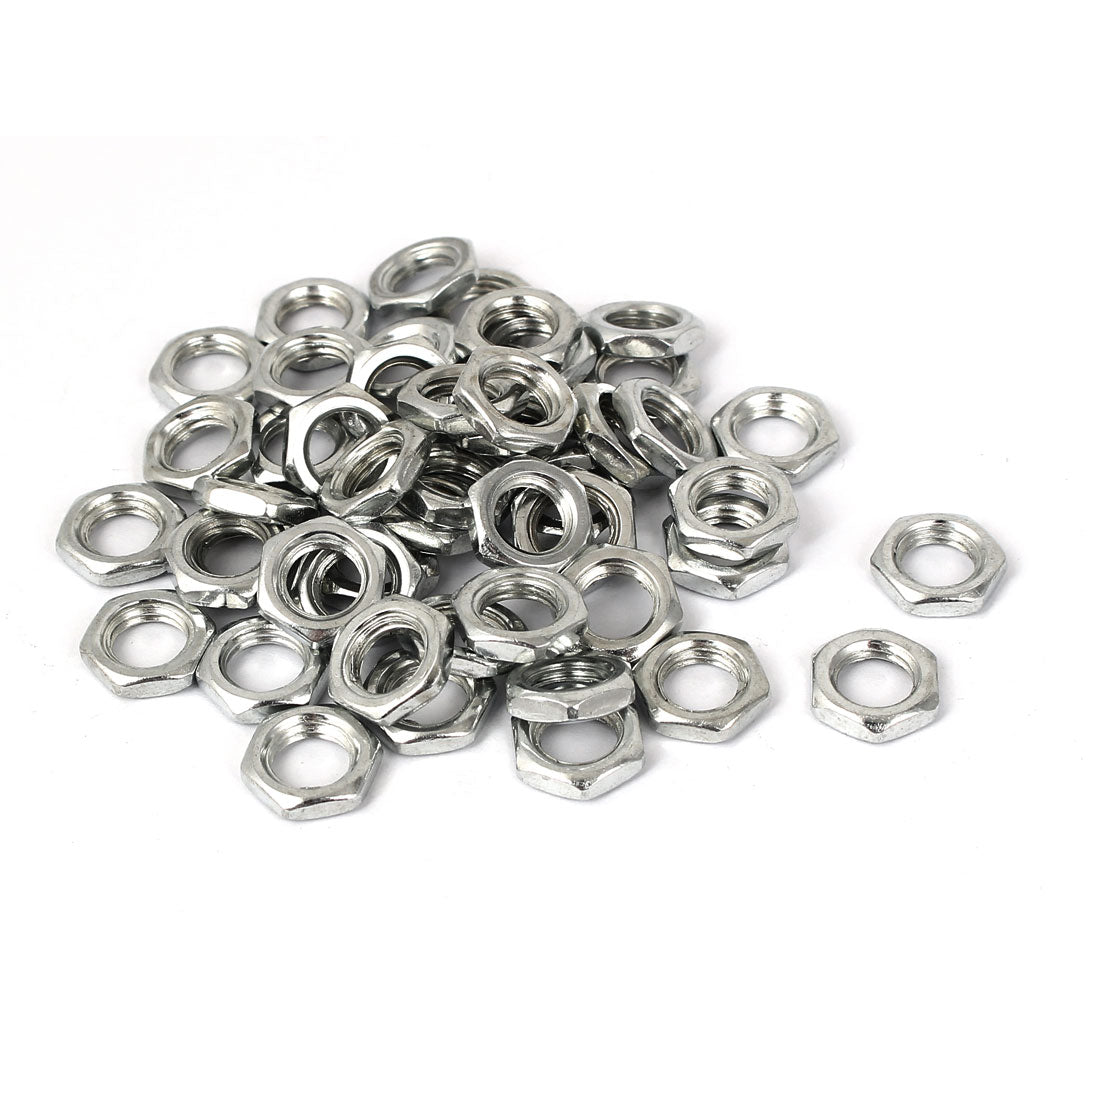 Uxcell Uxcell M10x1x4mm Zinc Plated Hex Nuts Fastener 50pcs for Screws Bolts